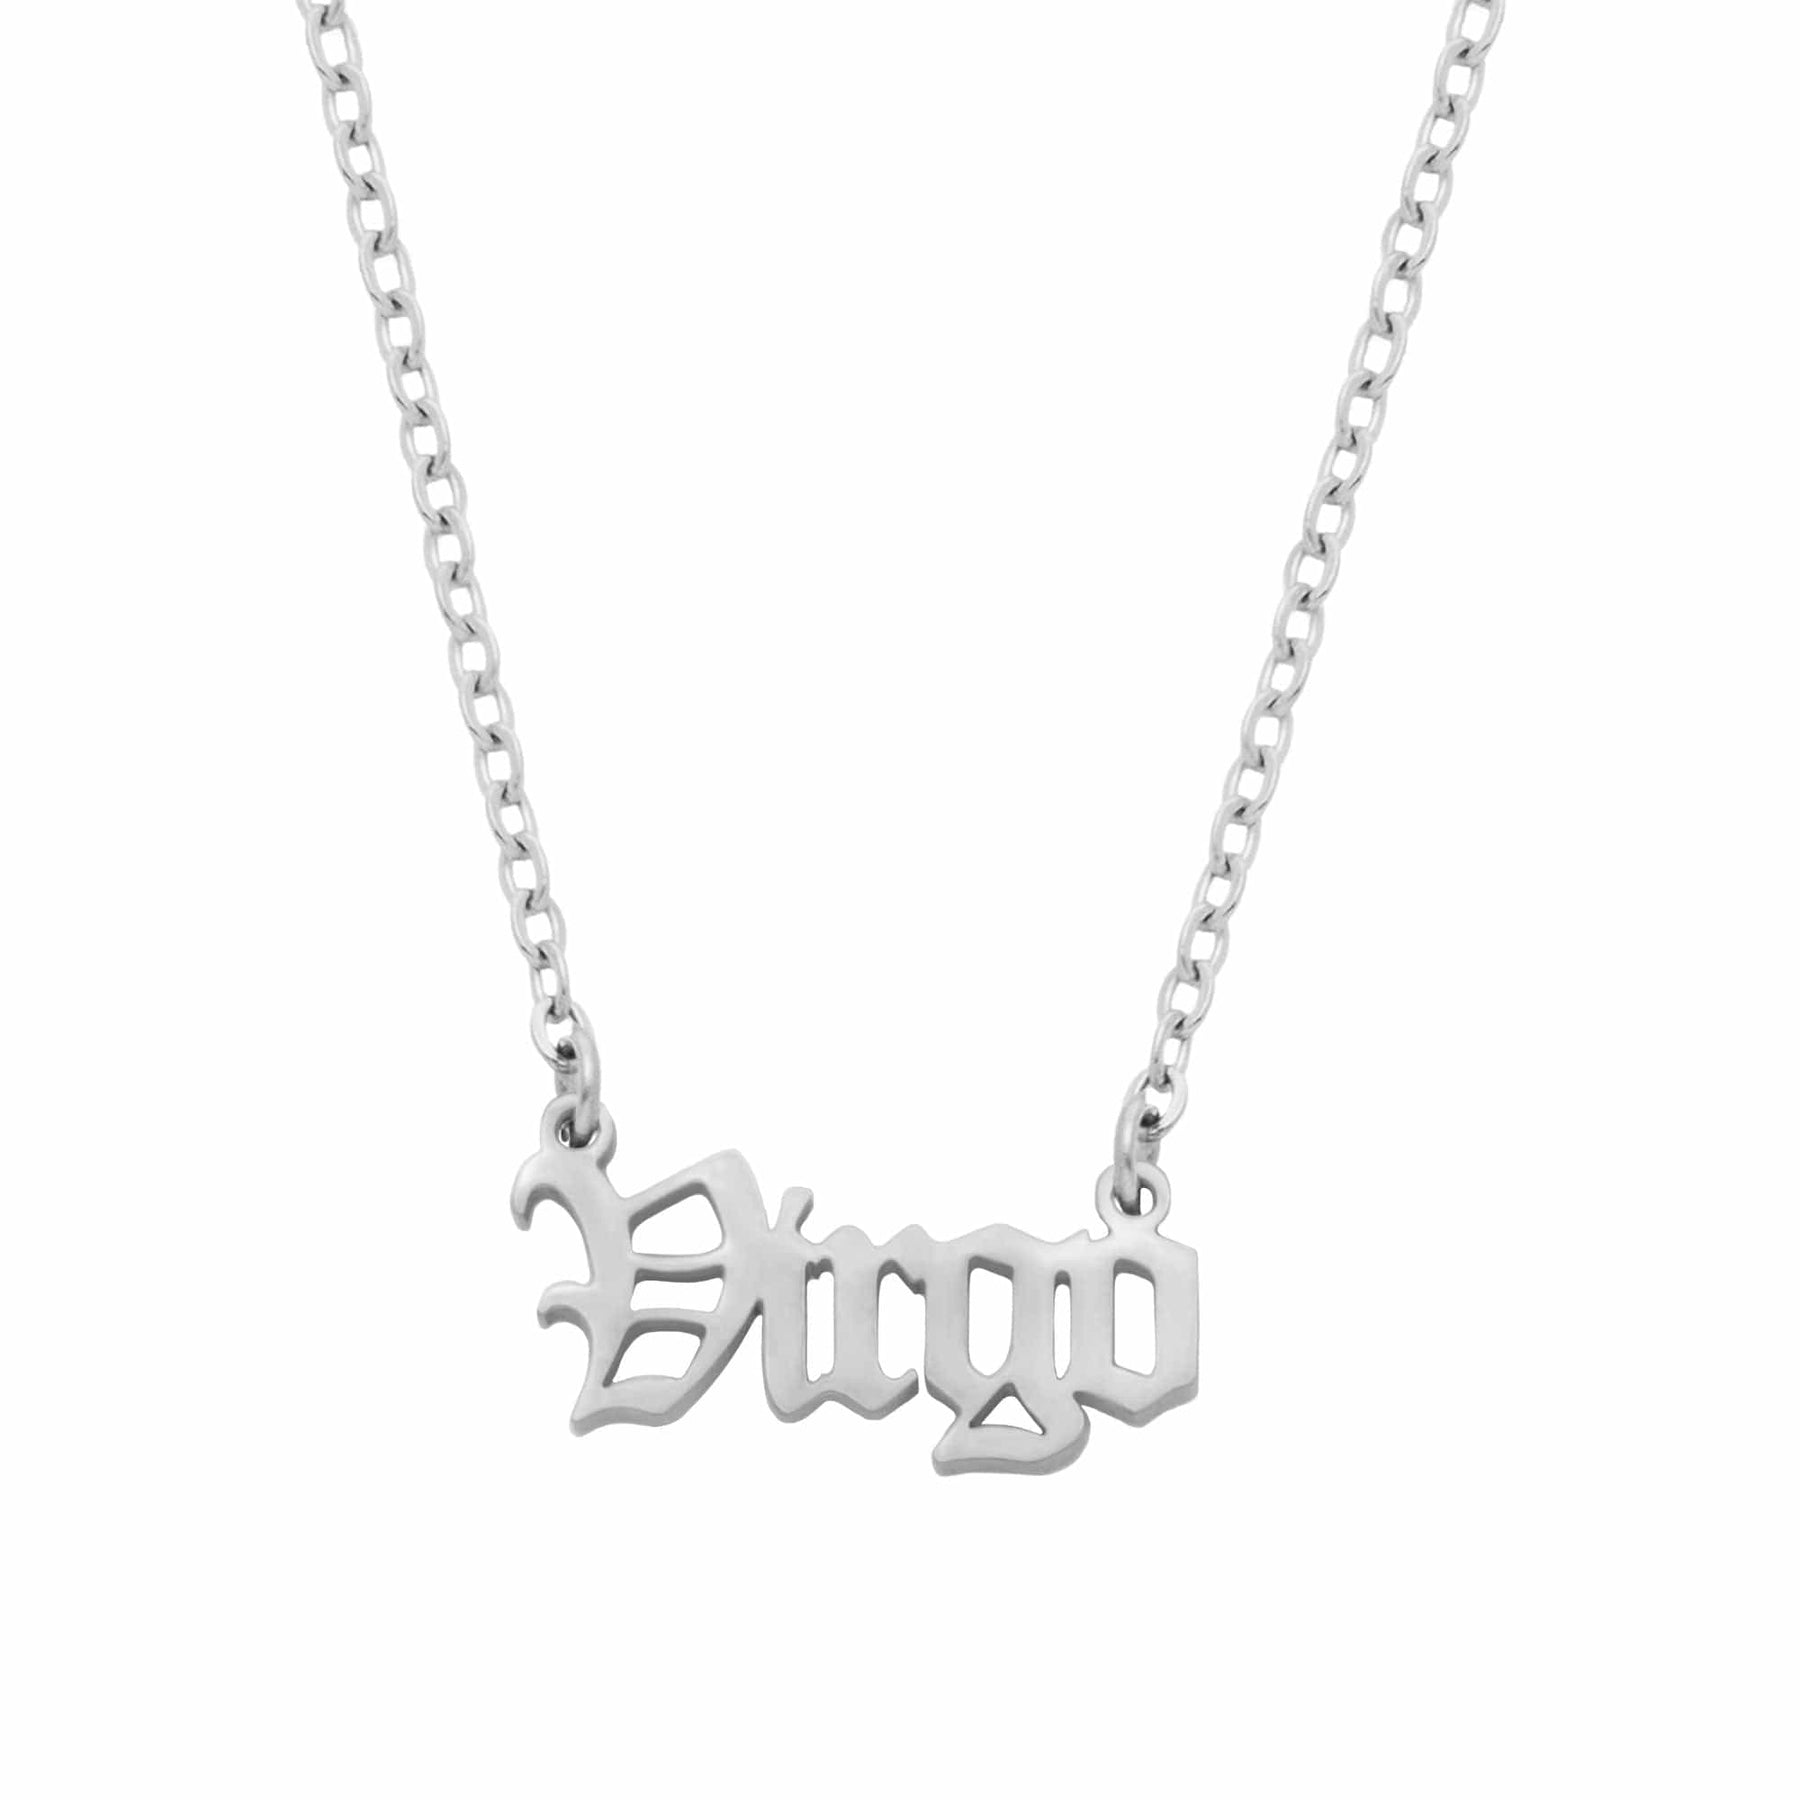 BohoMoon Stainless Steel Old English Zodiac Necklace Silver / Virgo